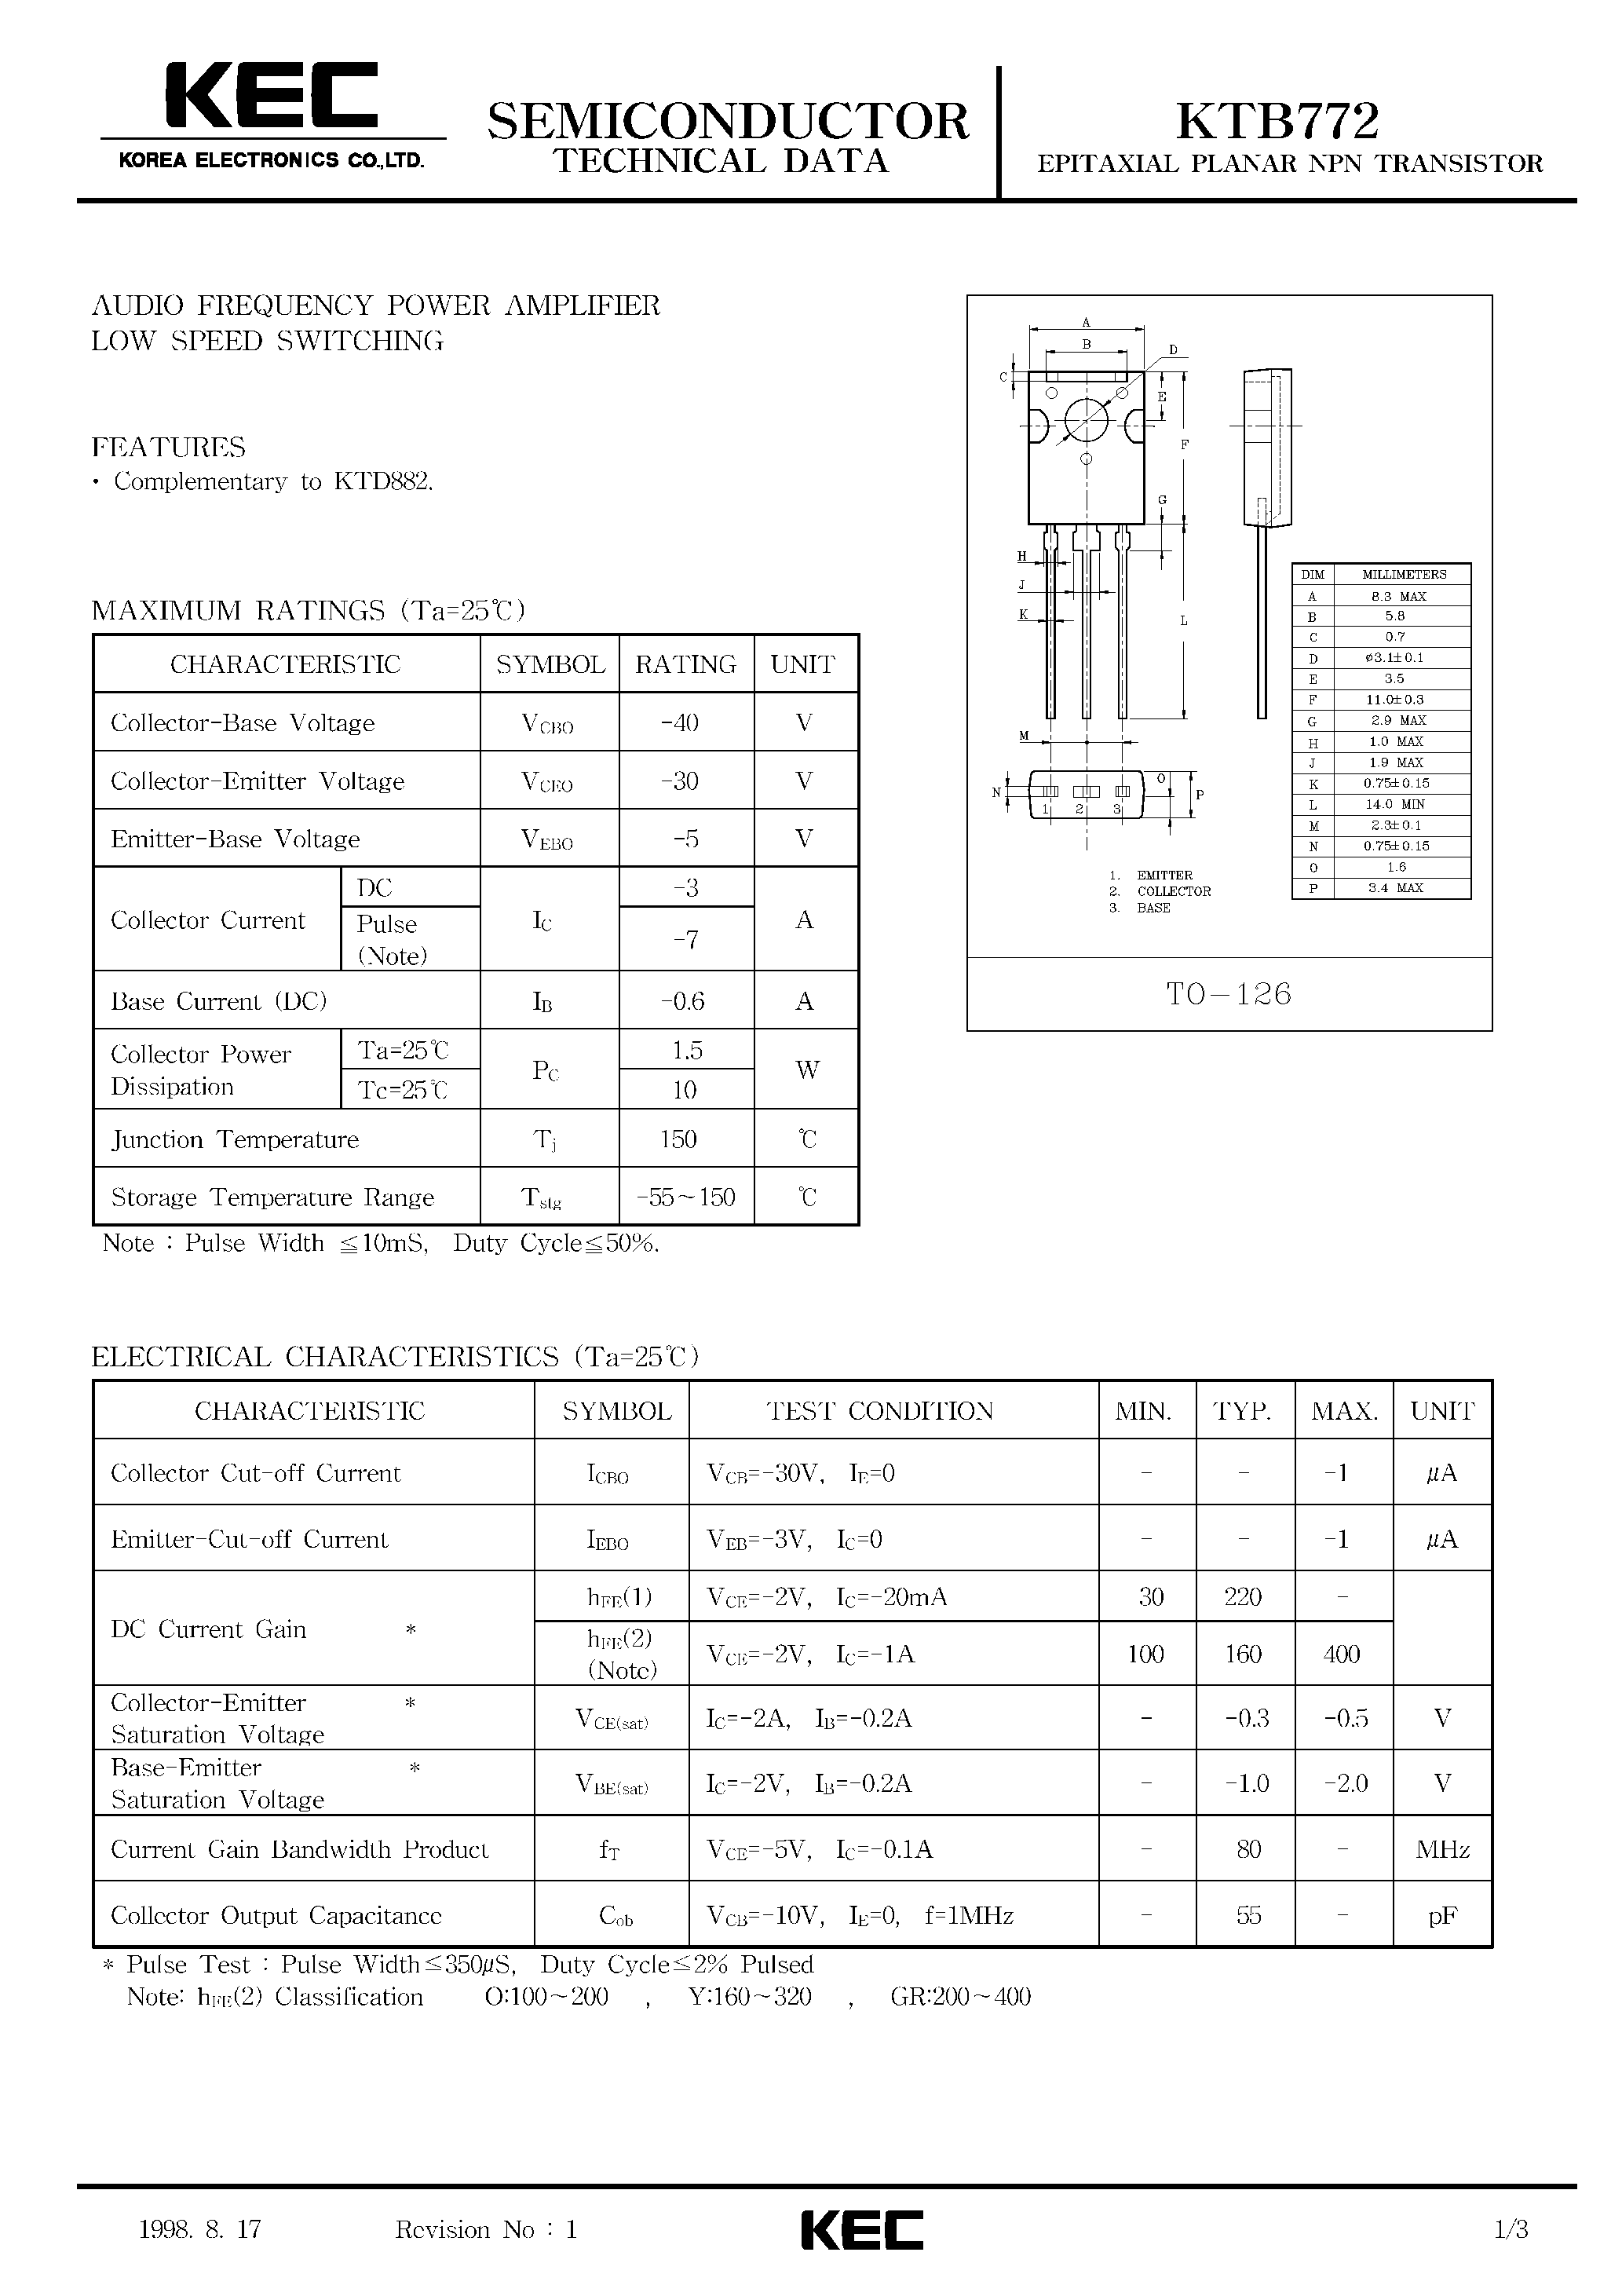 Datasheet KTB772 - EPITAXIAL PLANAR NPN TRANSISTOR (AUDIO FREQUENCY POWER AMPLIFIER LOW SPEED SWITCHING) page 1